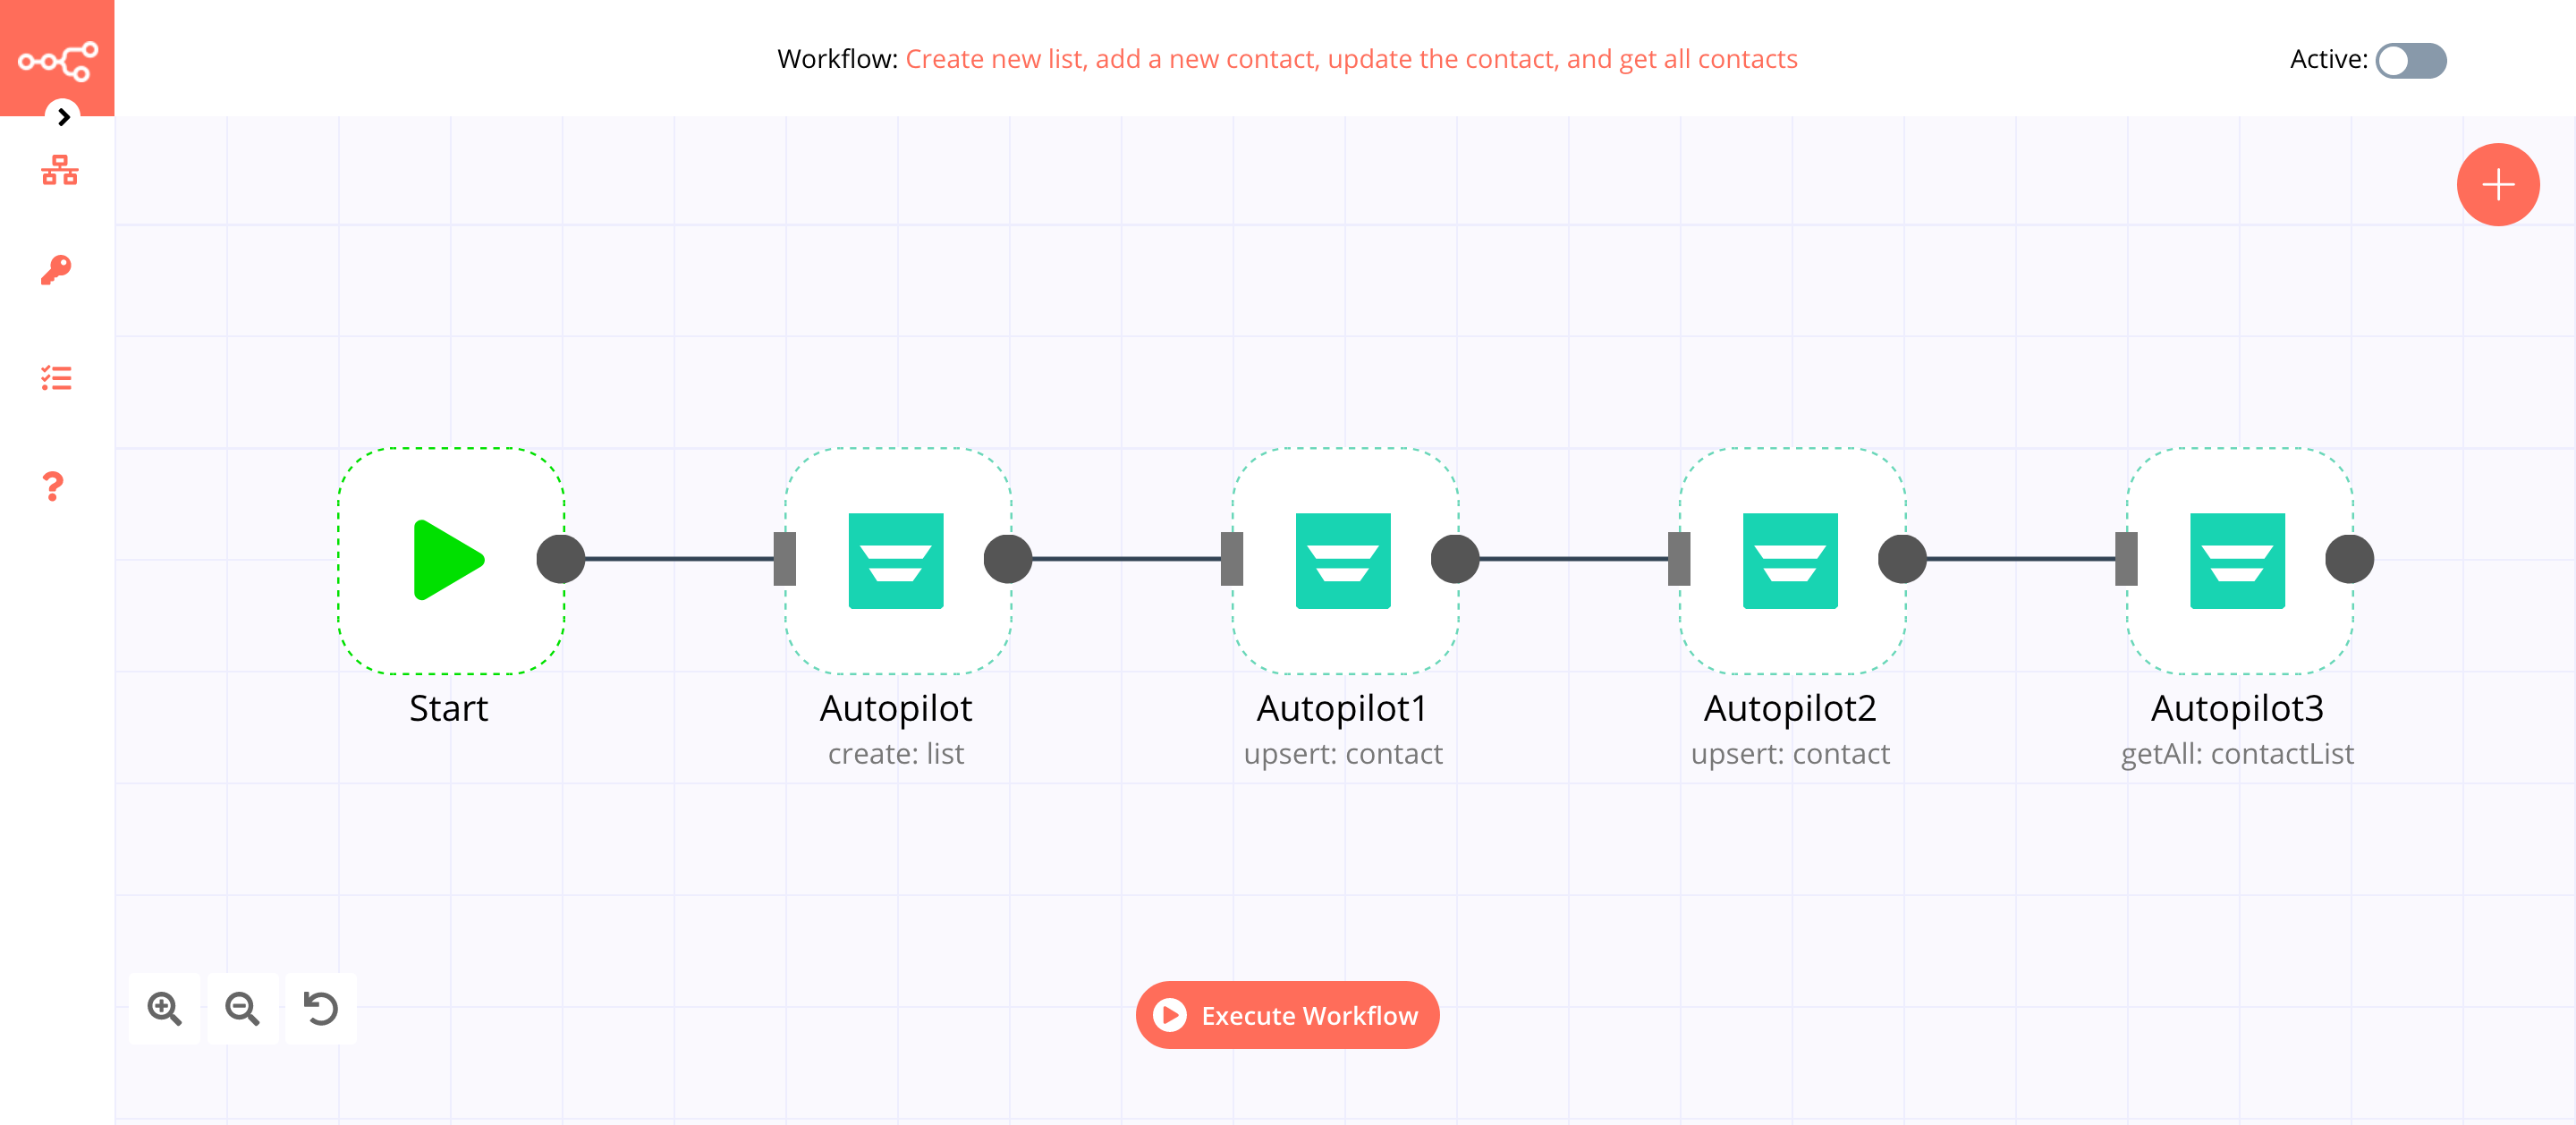 A workflow with the Autopilot node